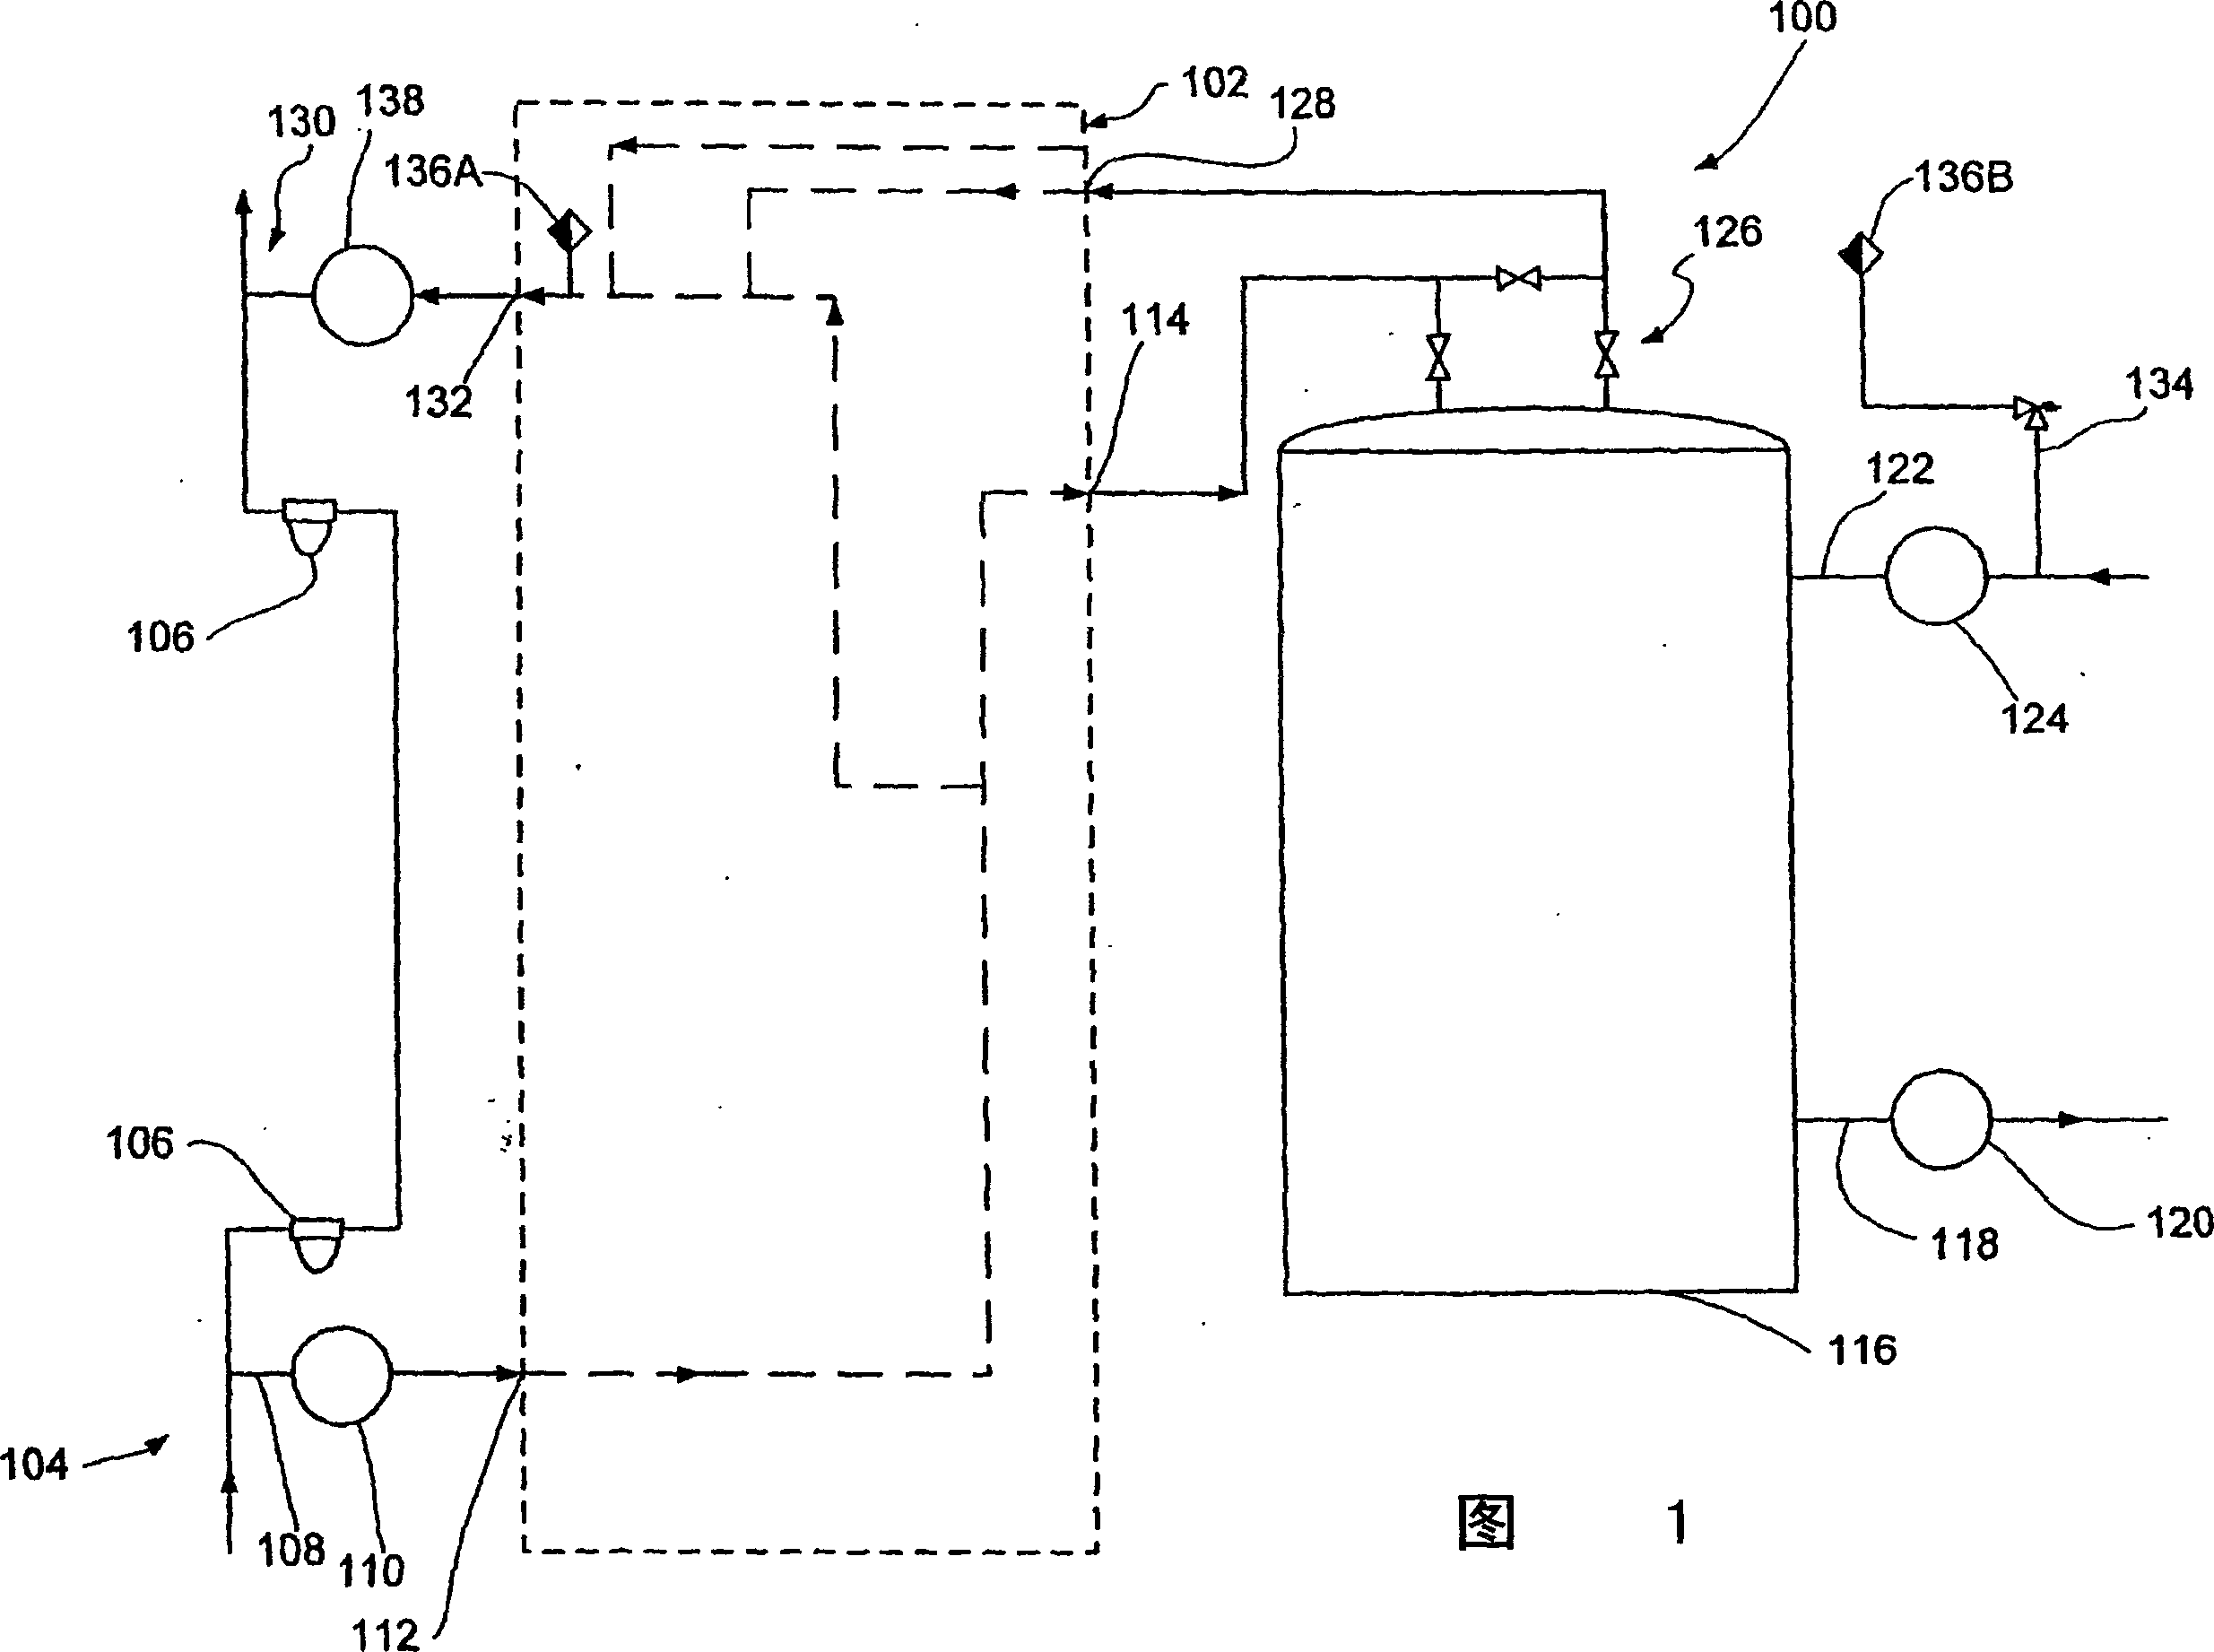 Apparatus for the liquefaction of natural gas and methods relating to same